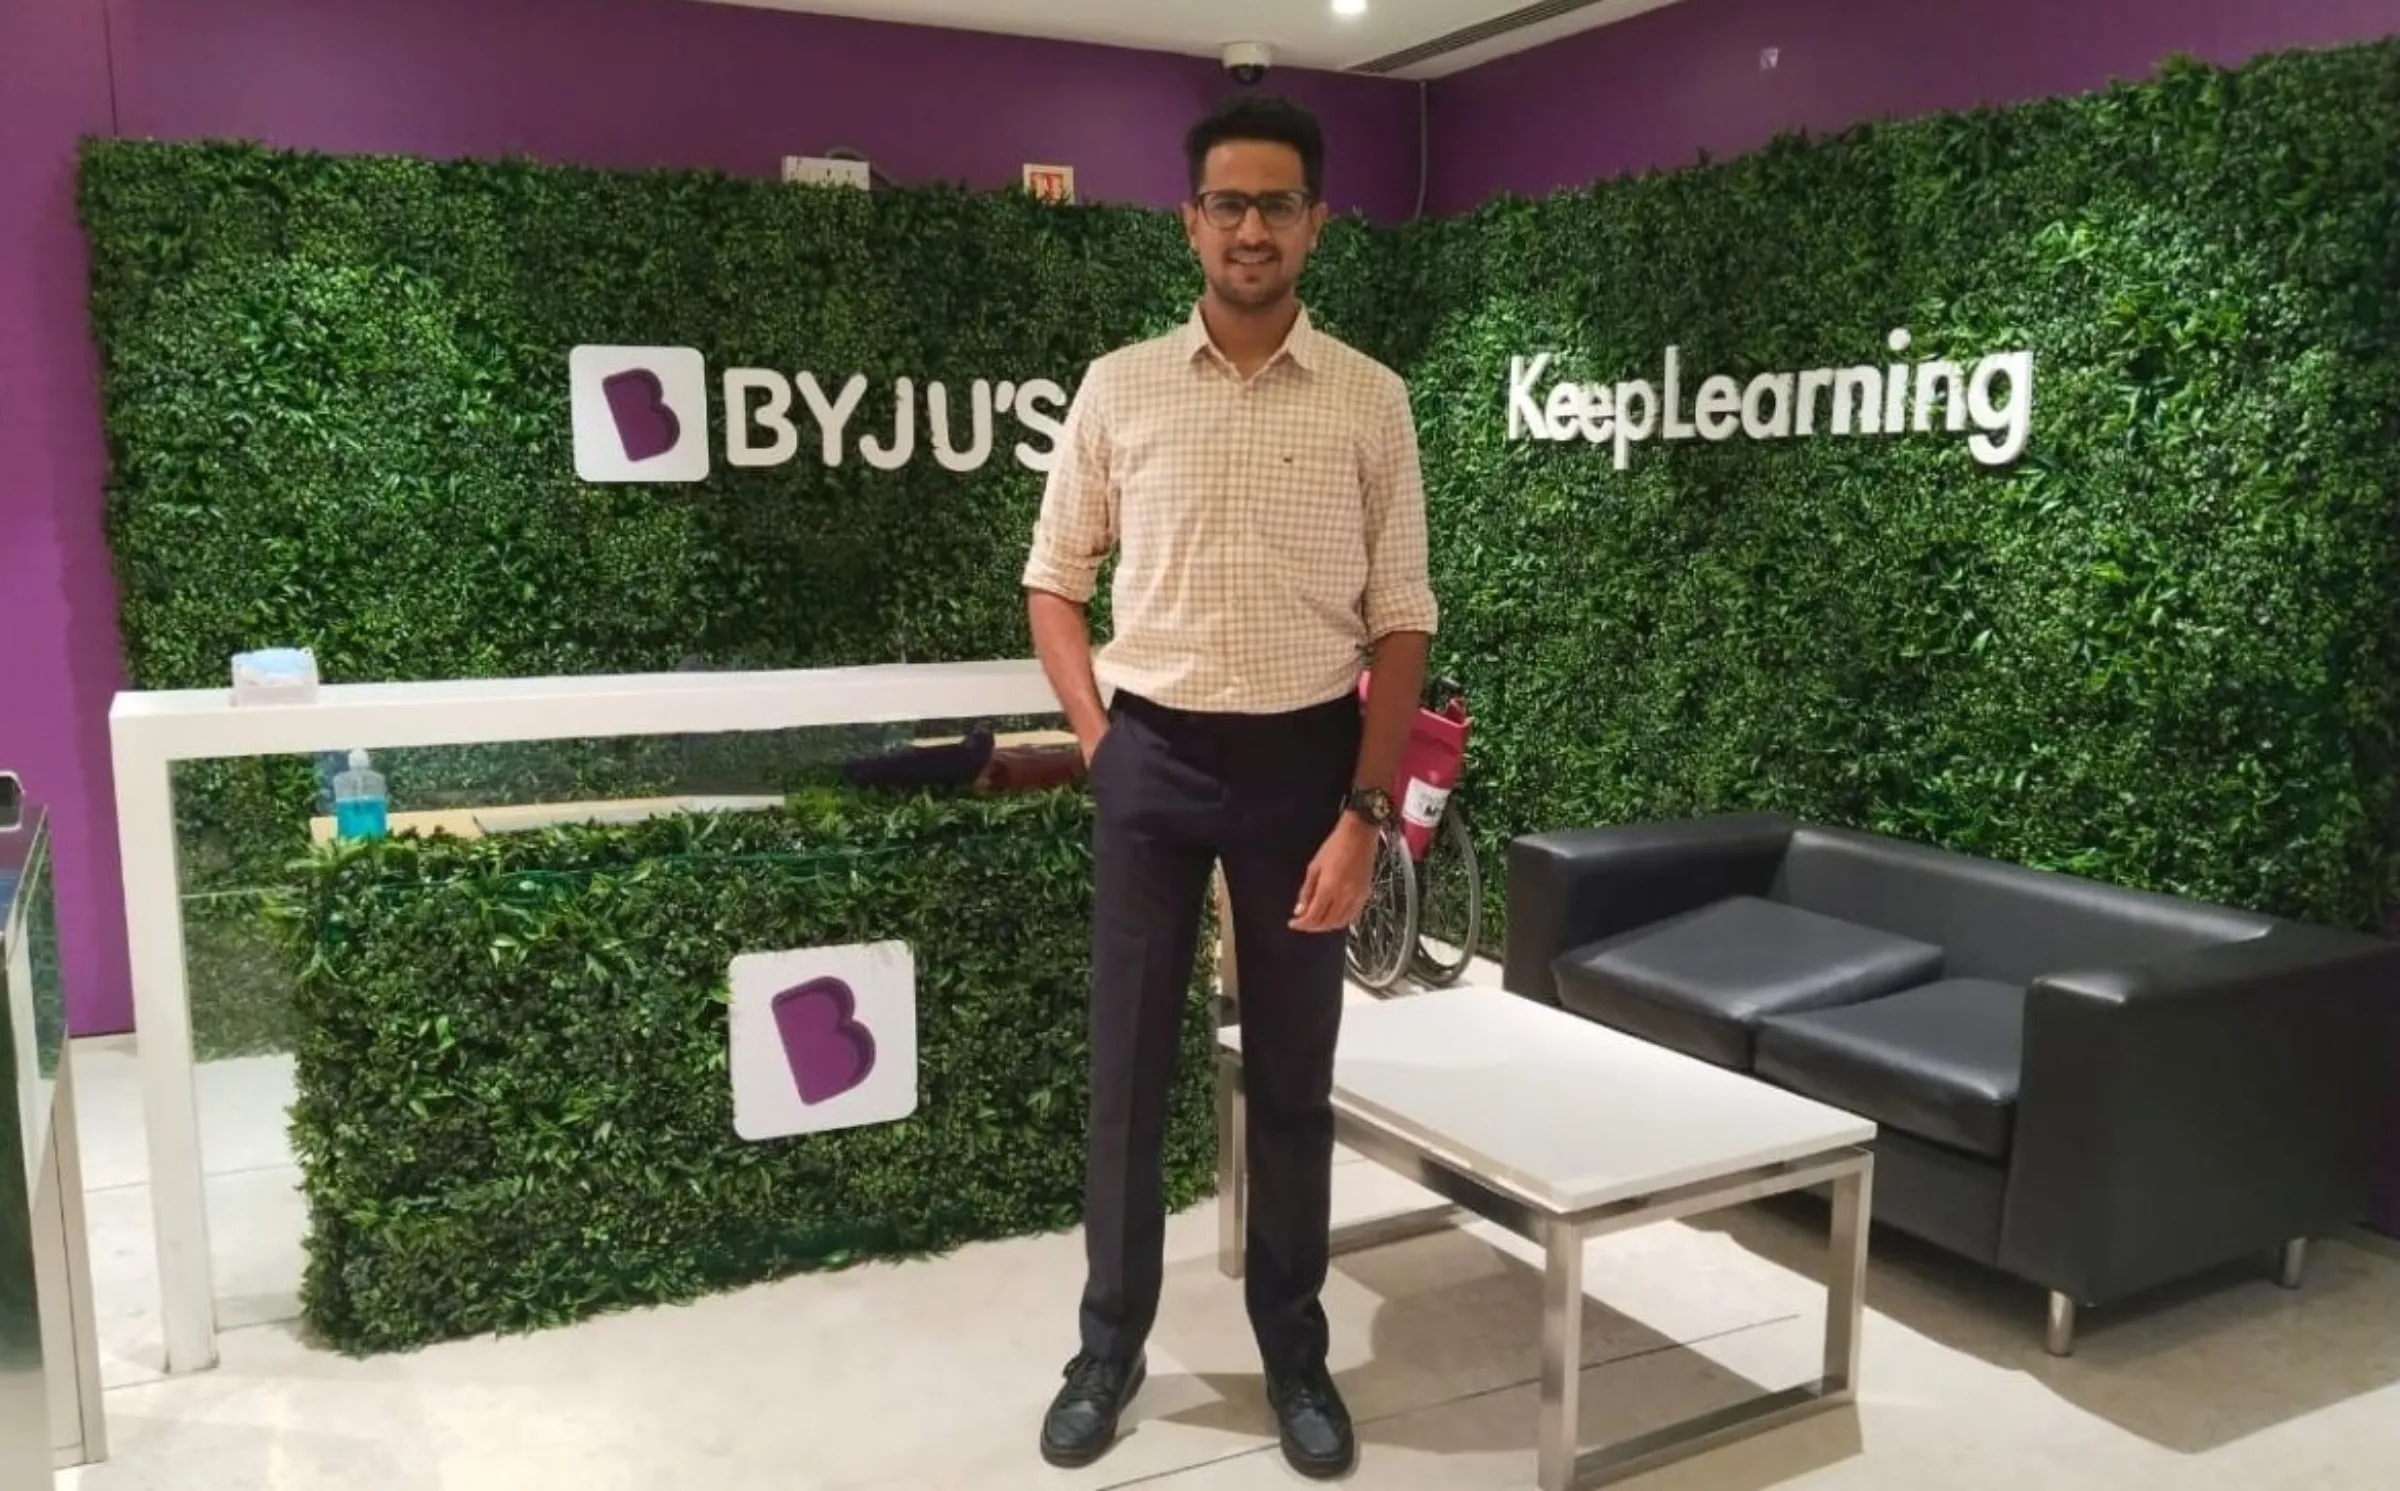 Pratik Makhija, a former employee at Indian edtech giant Byju's, poses for a photo at the office reception in Bengaluru, India, October 17, 2022